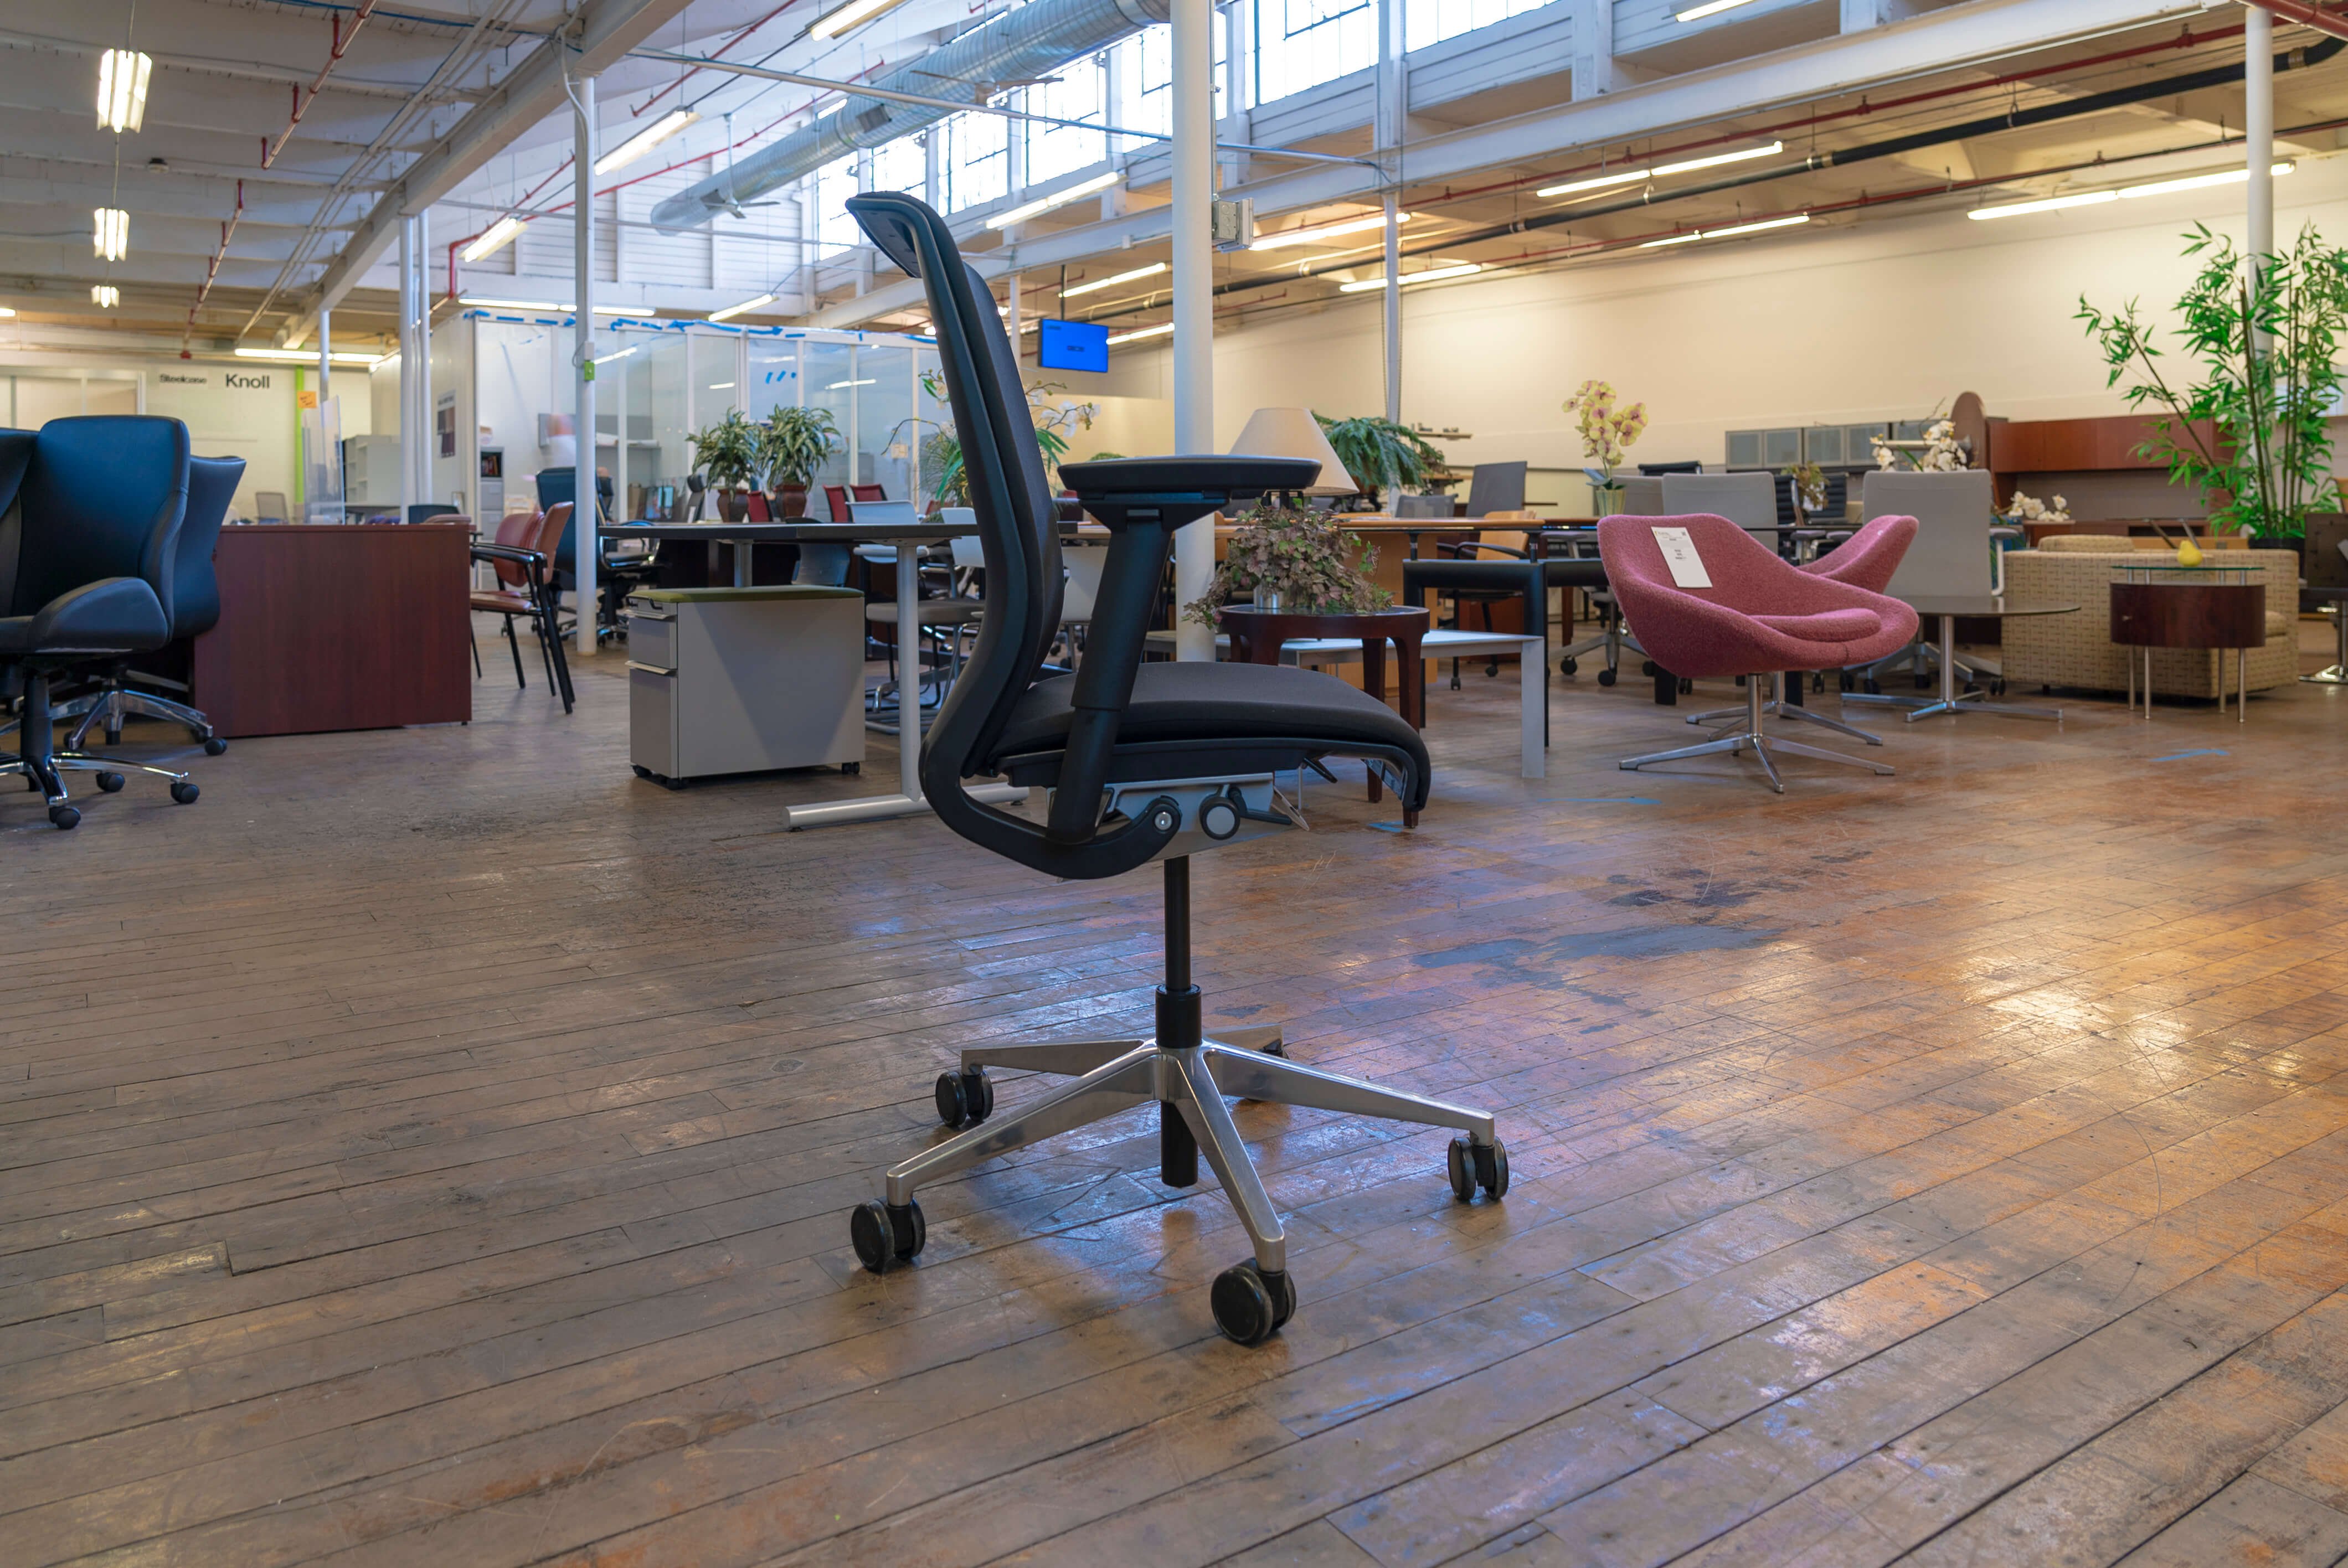 steelcase-think-v1-task-chairs